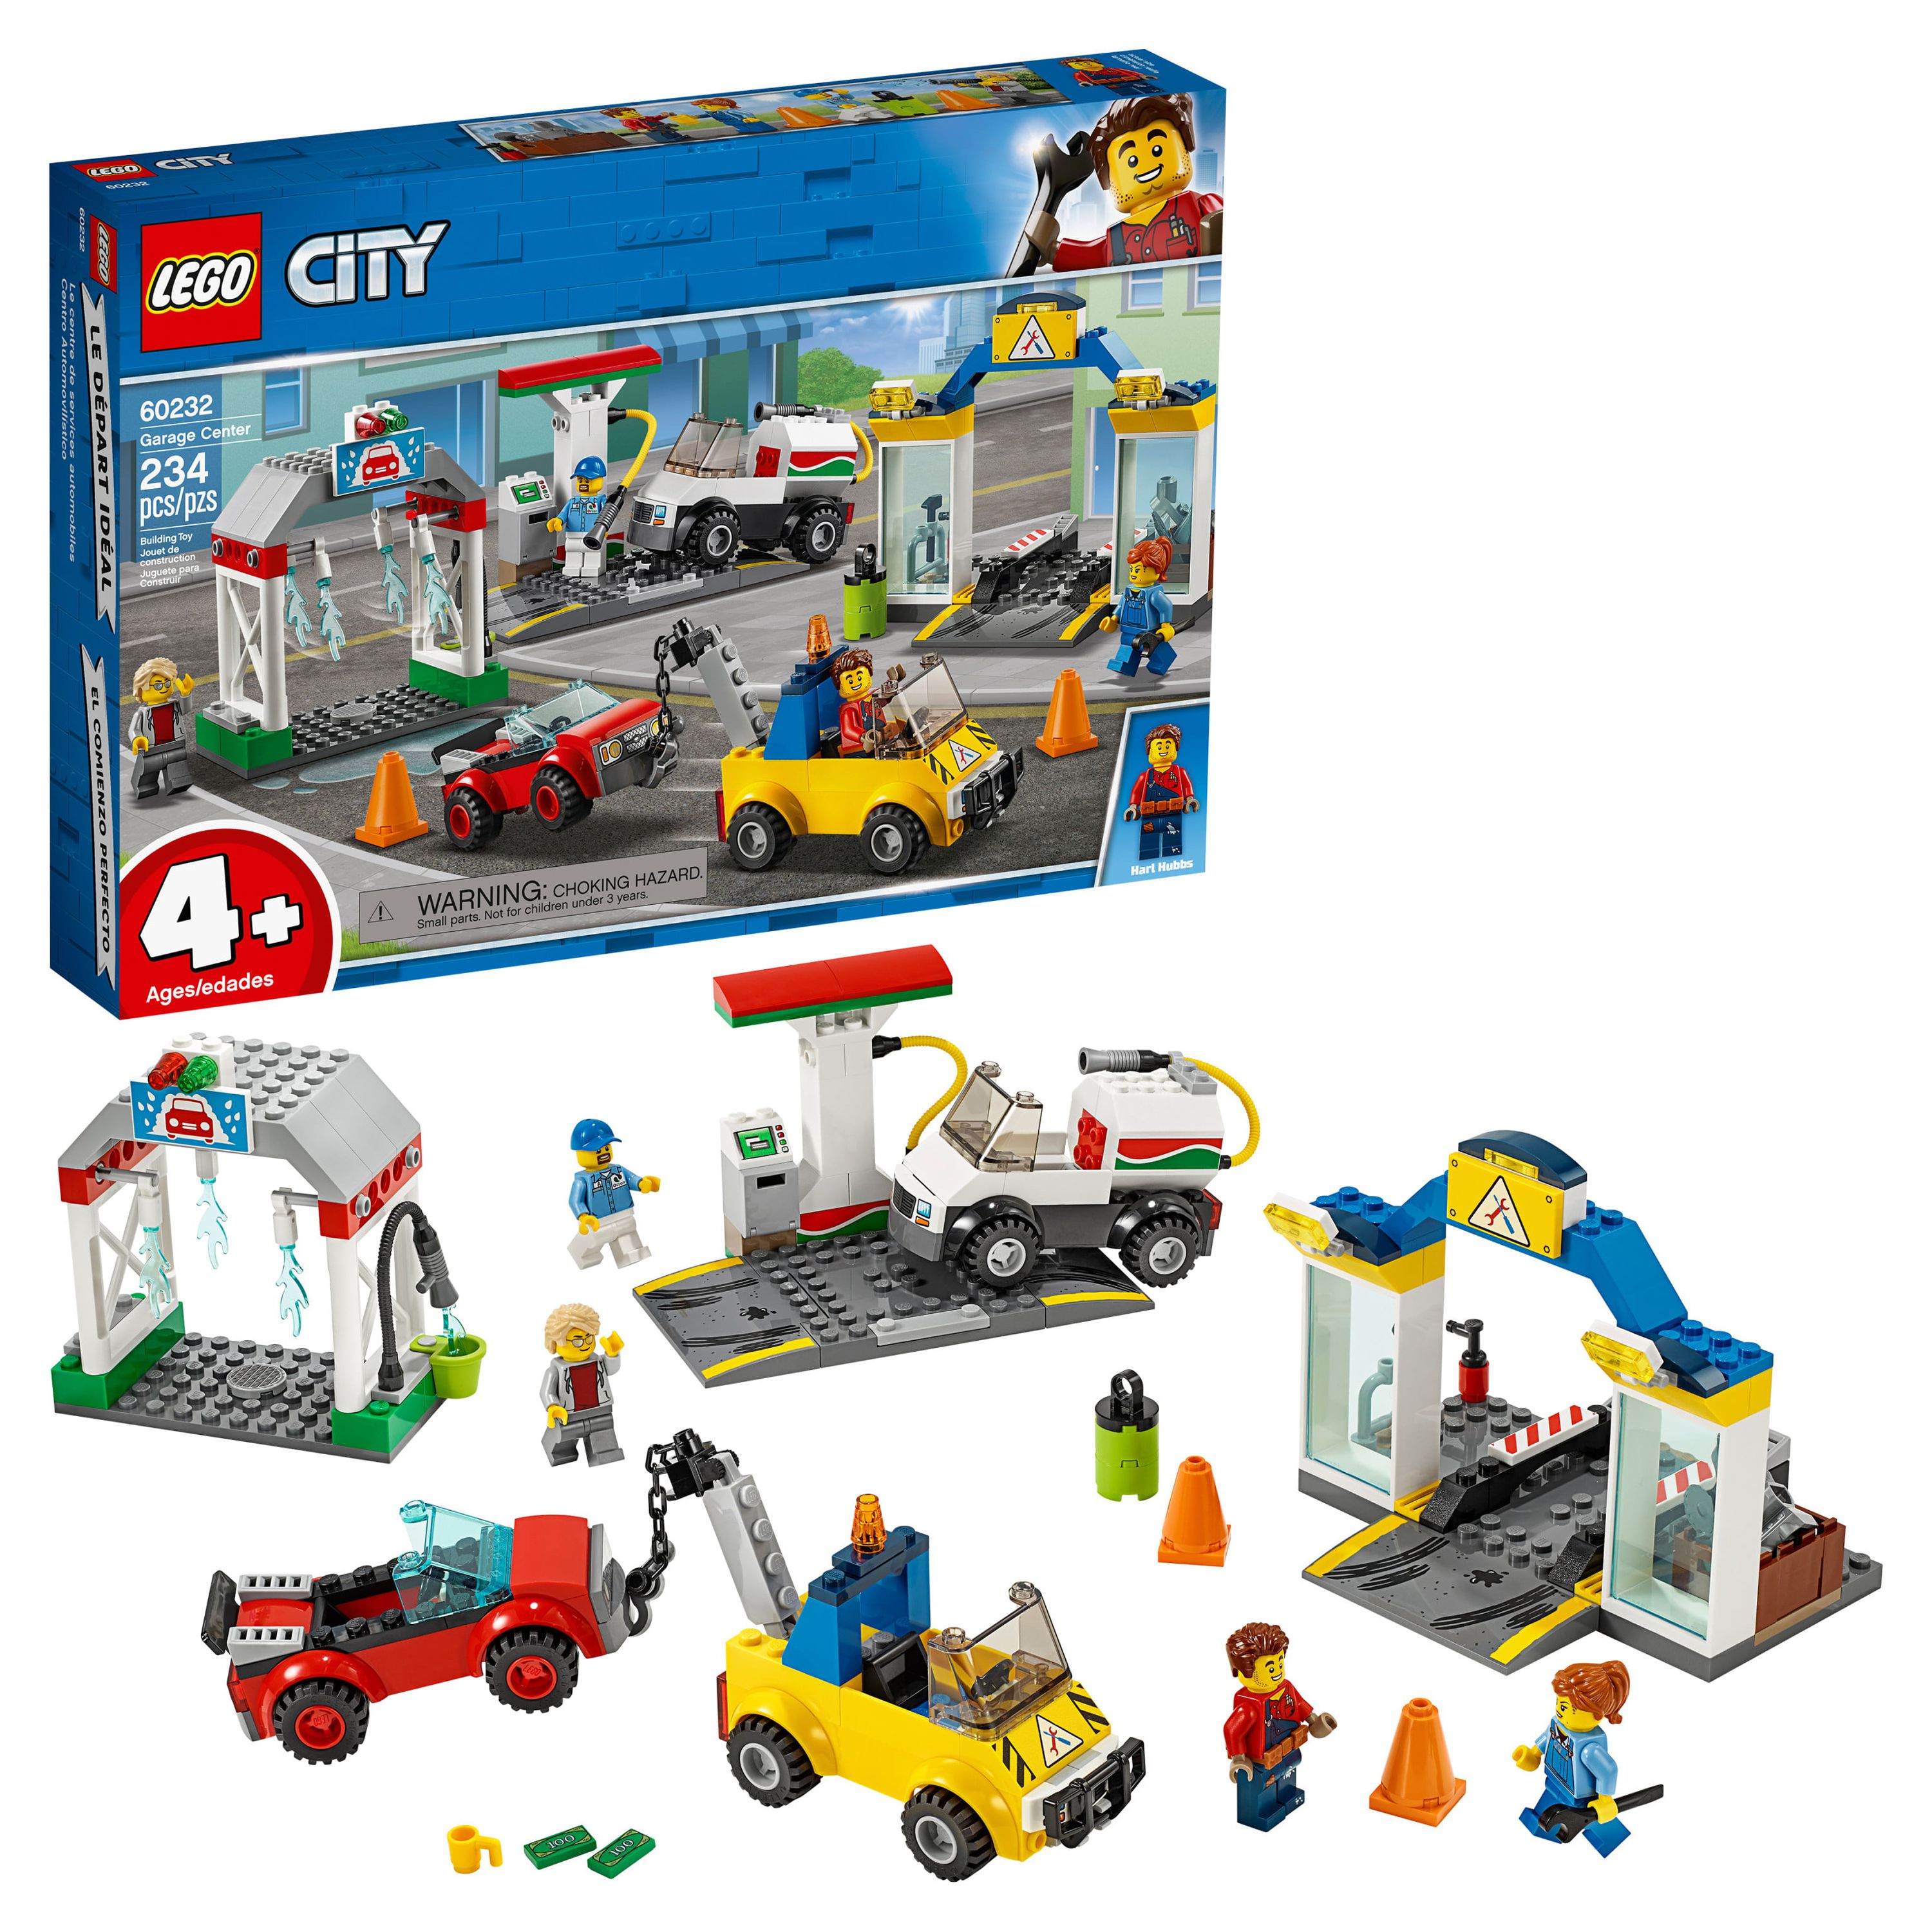 LEGO City Garage Center 60232 Preschool Kids Building Toy Truck Car Garage Gas Station Learning Play Kit (234 Pieces) - image 3 of 6